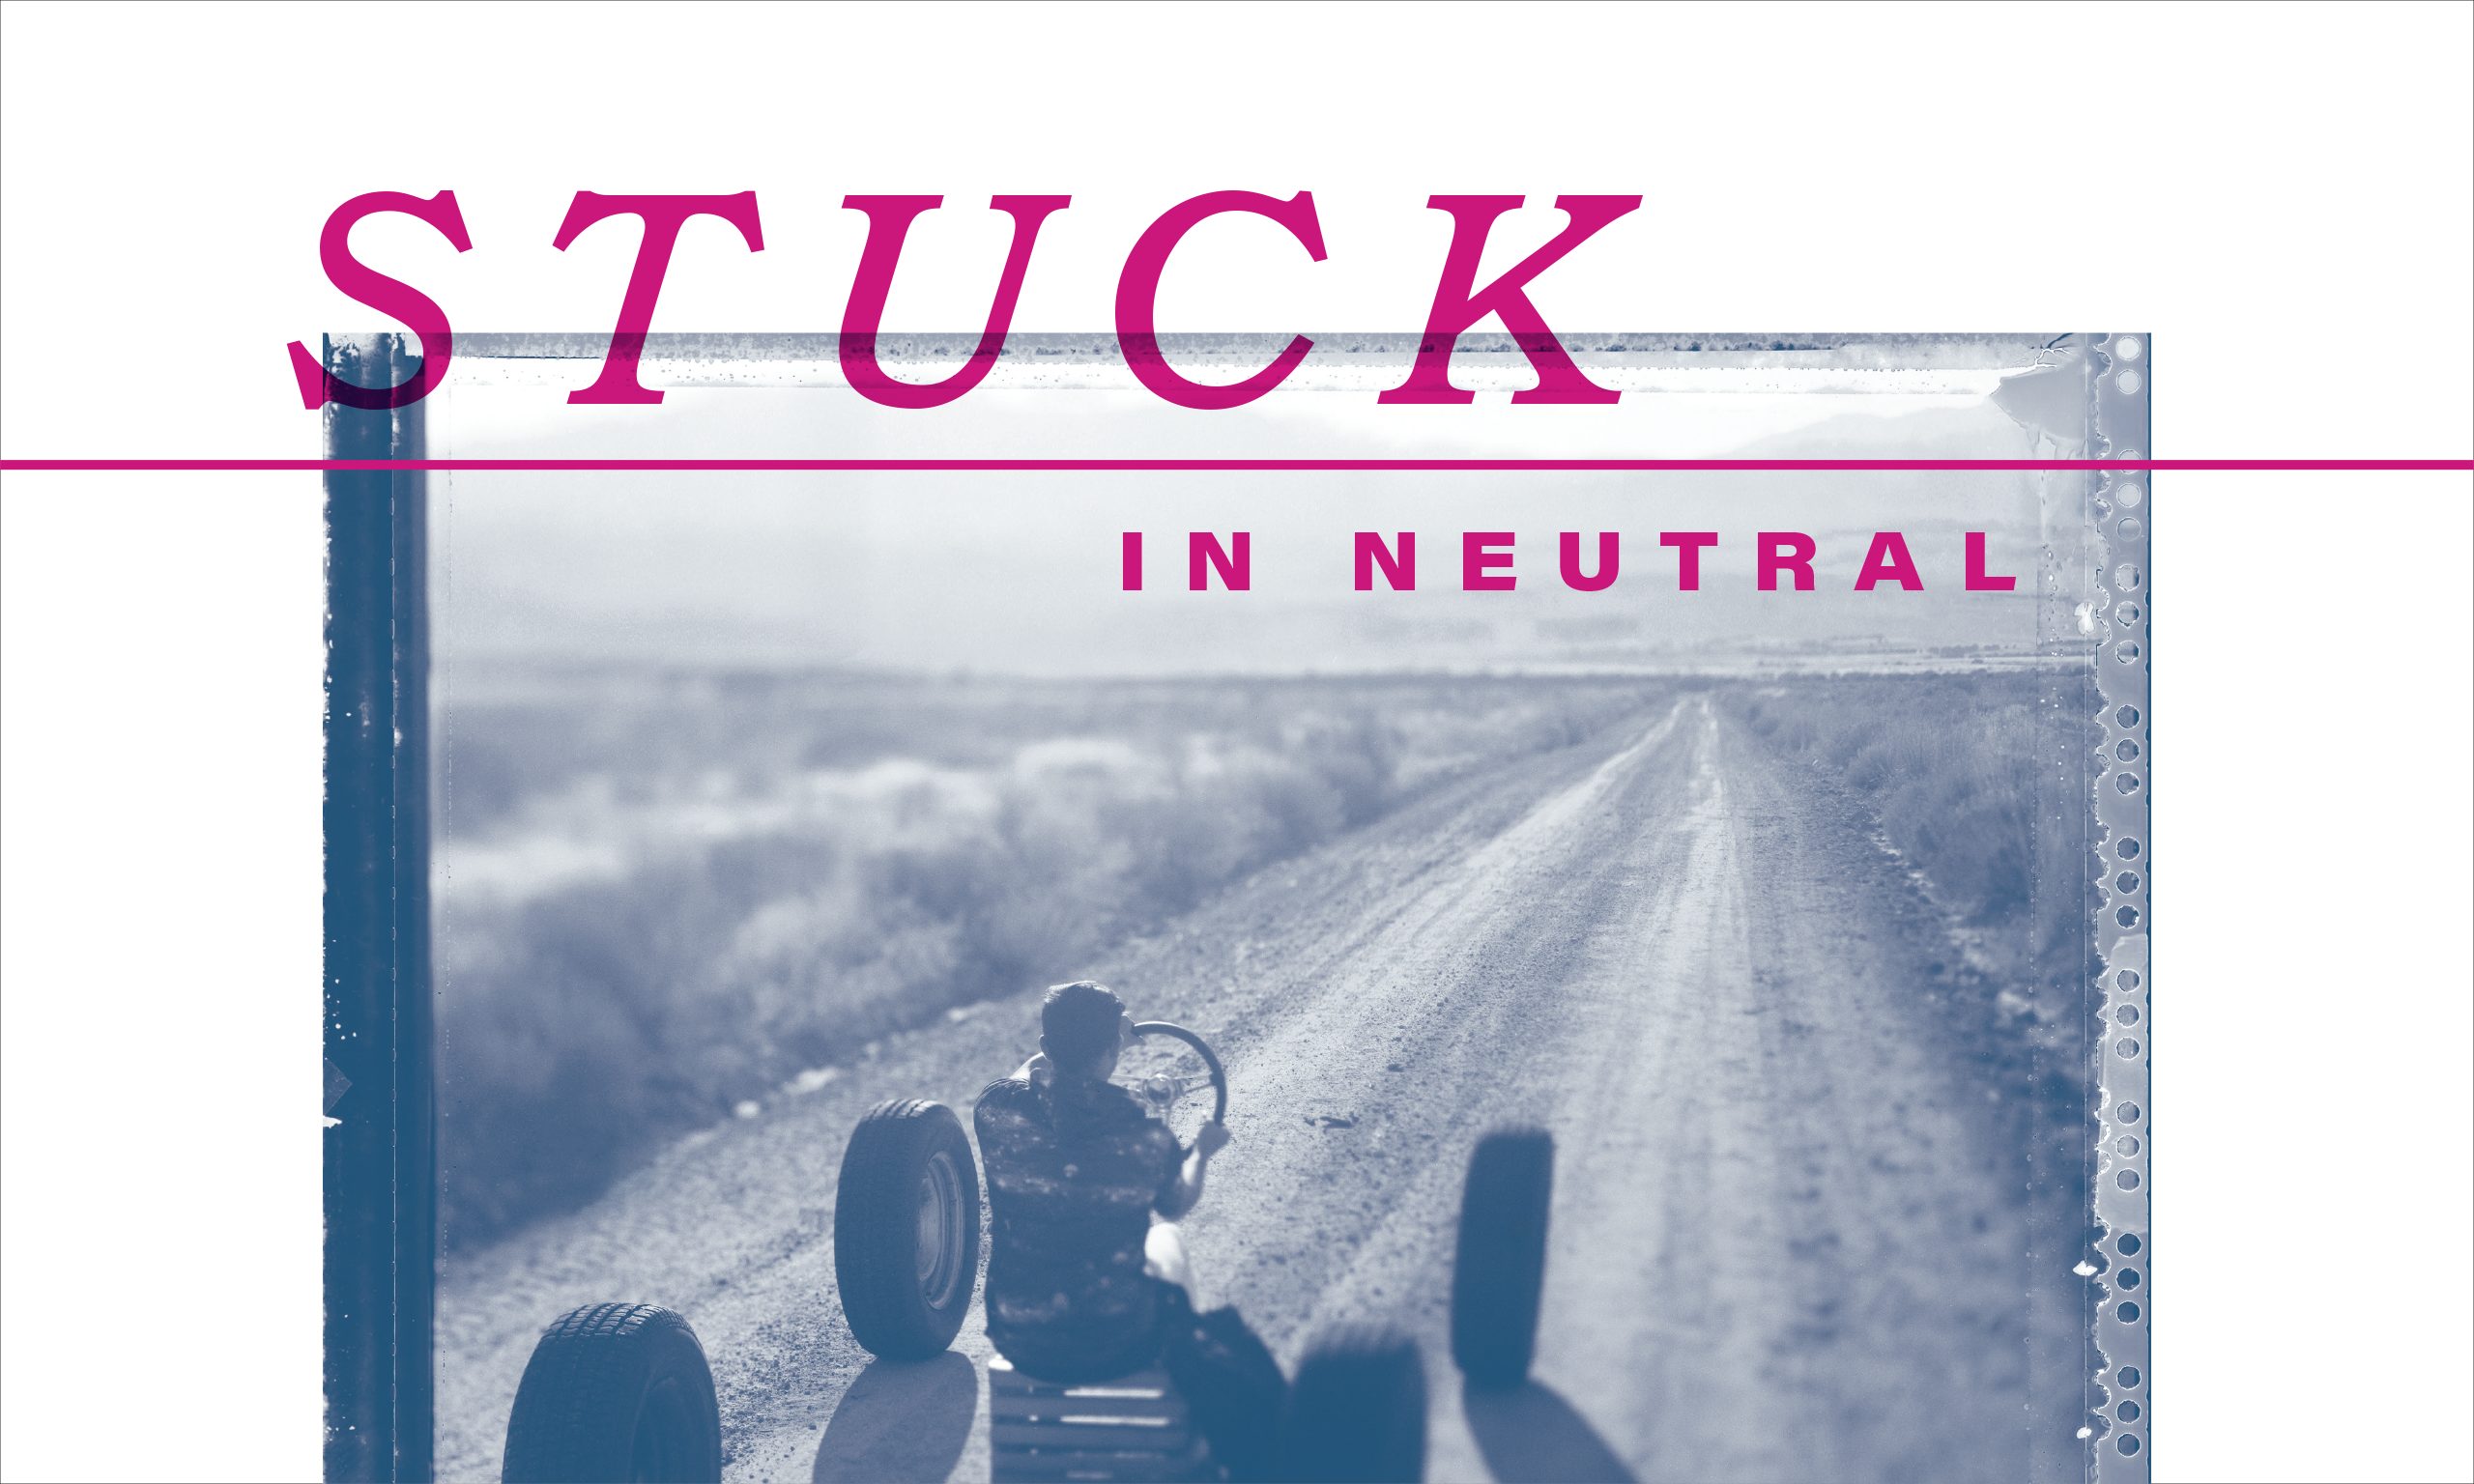 Title "Stuck in Neutral" with image of young man sits on a box on the road, holding a steering wheel and sitting amid four tires.